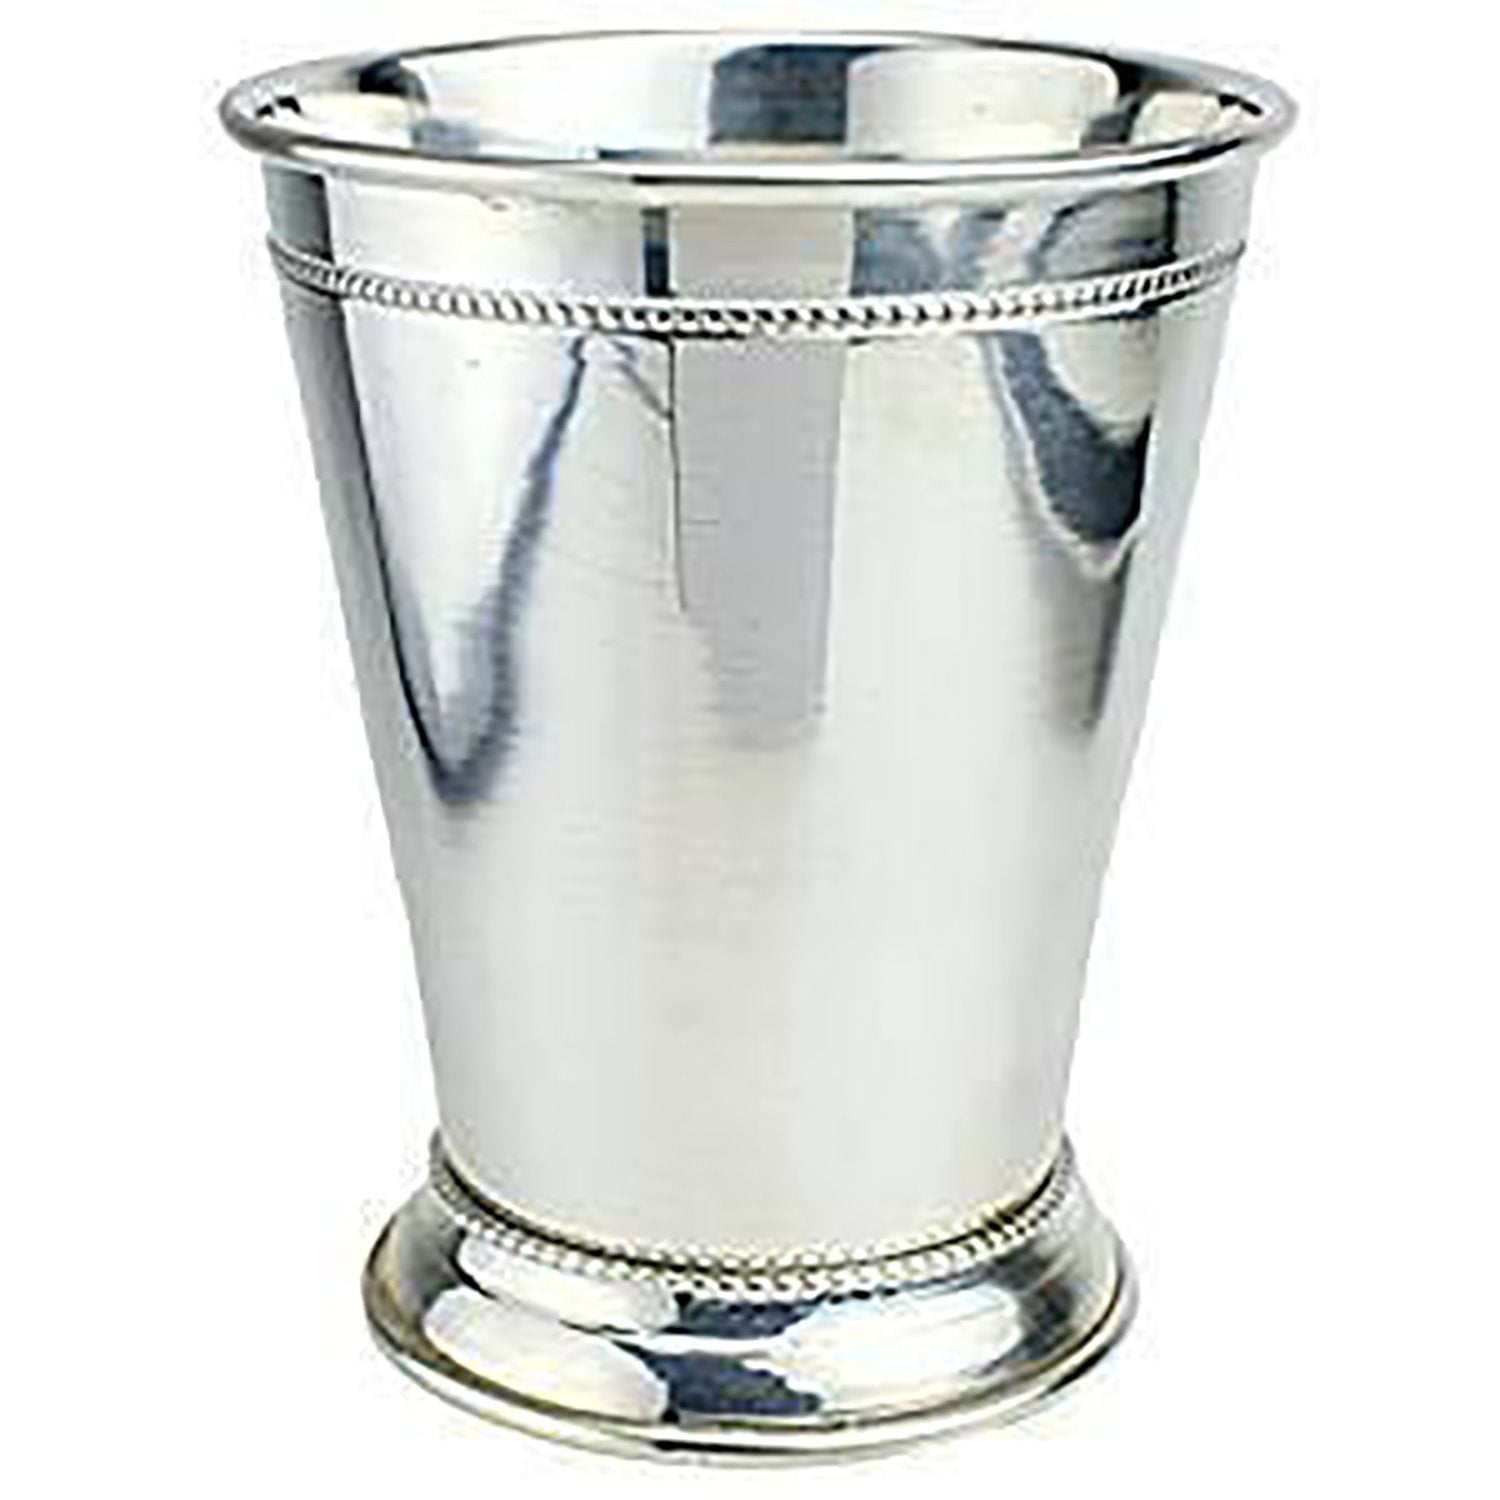 Prince of Scots Copper Mint Julep Cup w/ Pure Silver-Plate (Set of 4)-Mint Julep-Prince of Scots-810032751609-4MintJulepSP-Prince of Scots